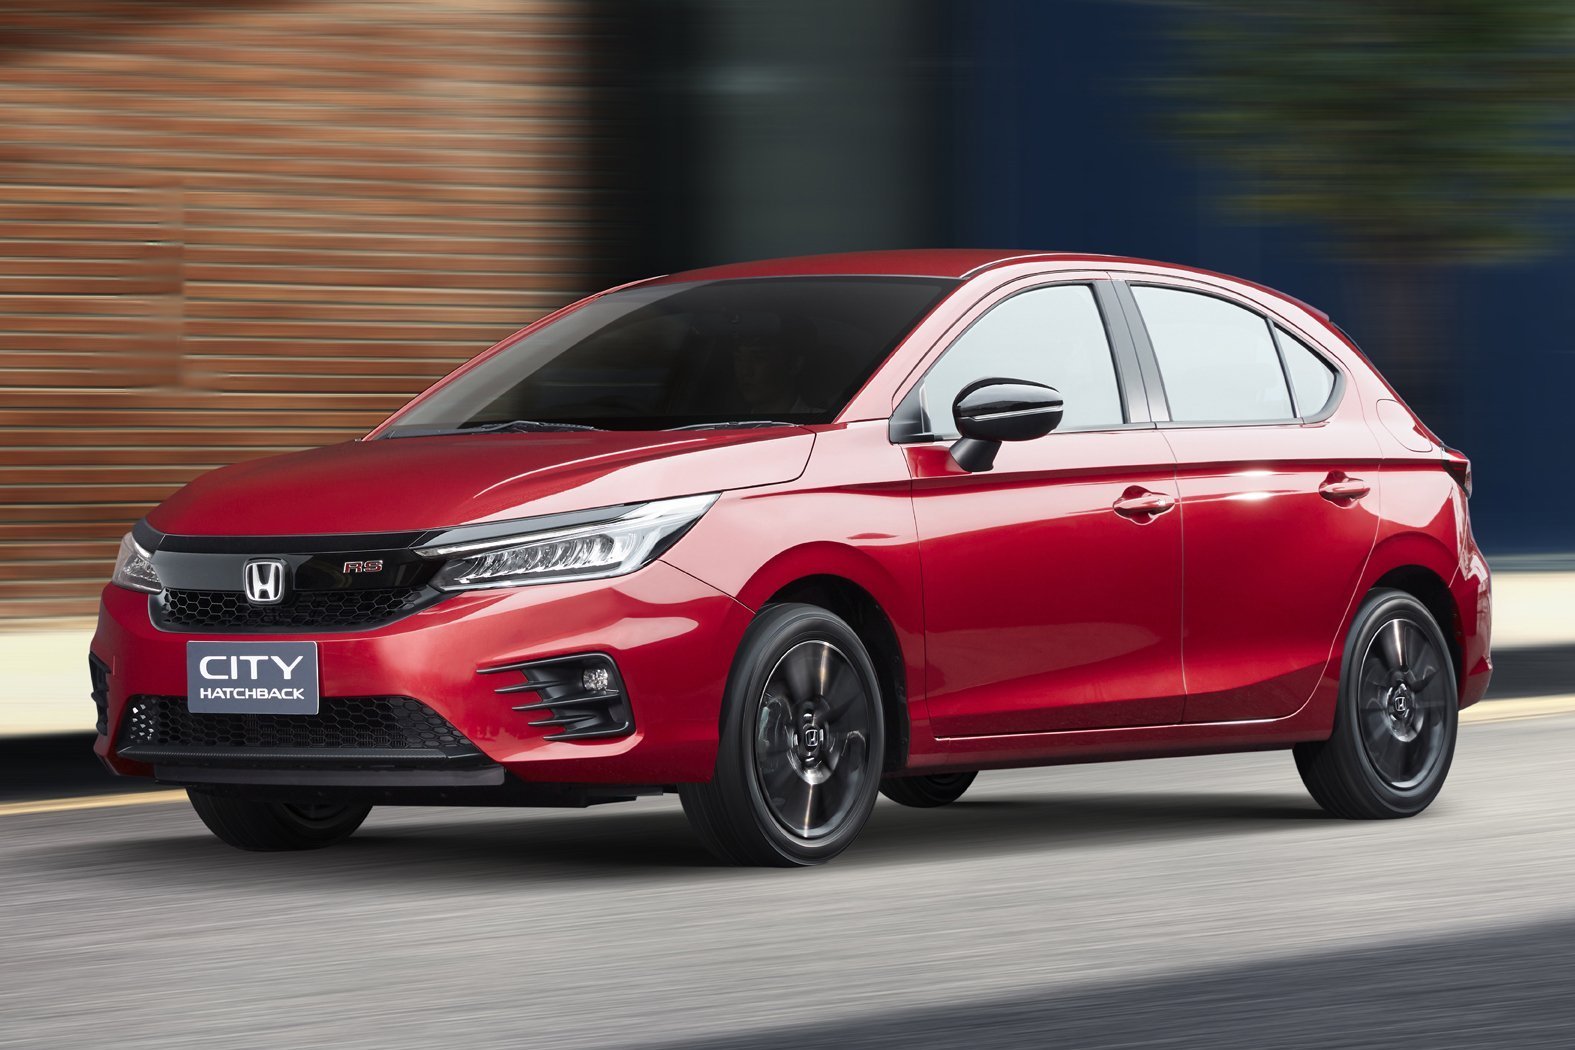 Honda Cars PH confirms City Hatchback to replace the Jazz this month